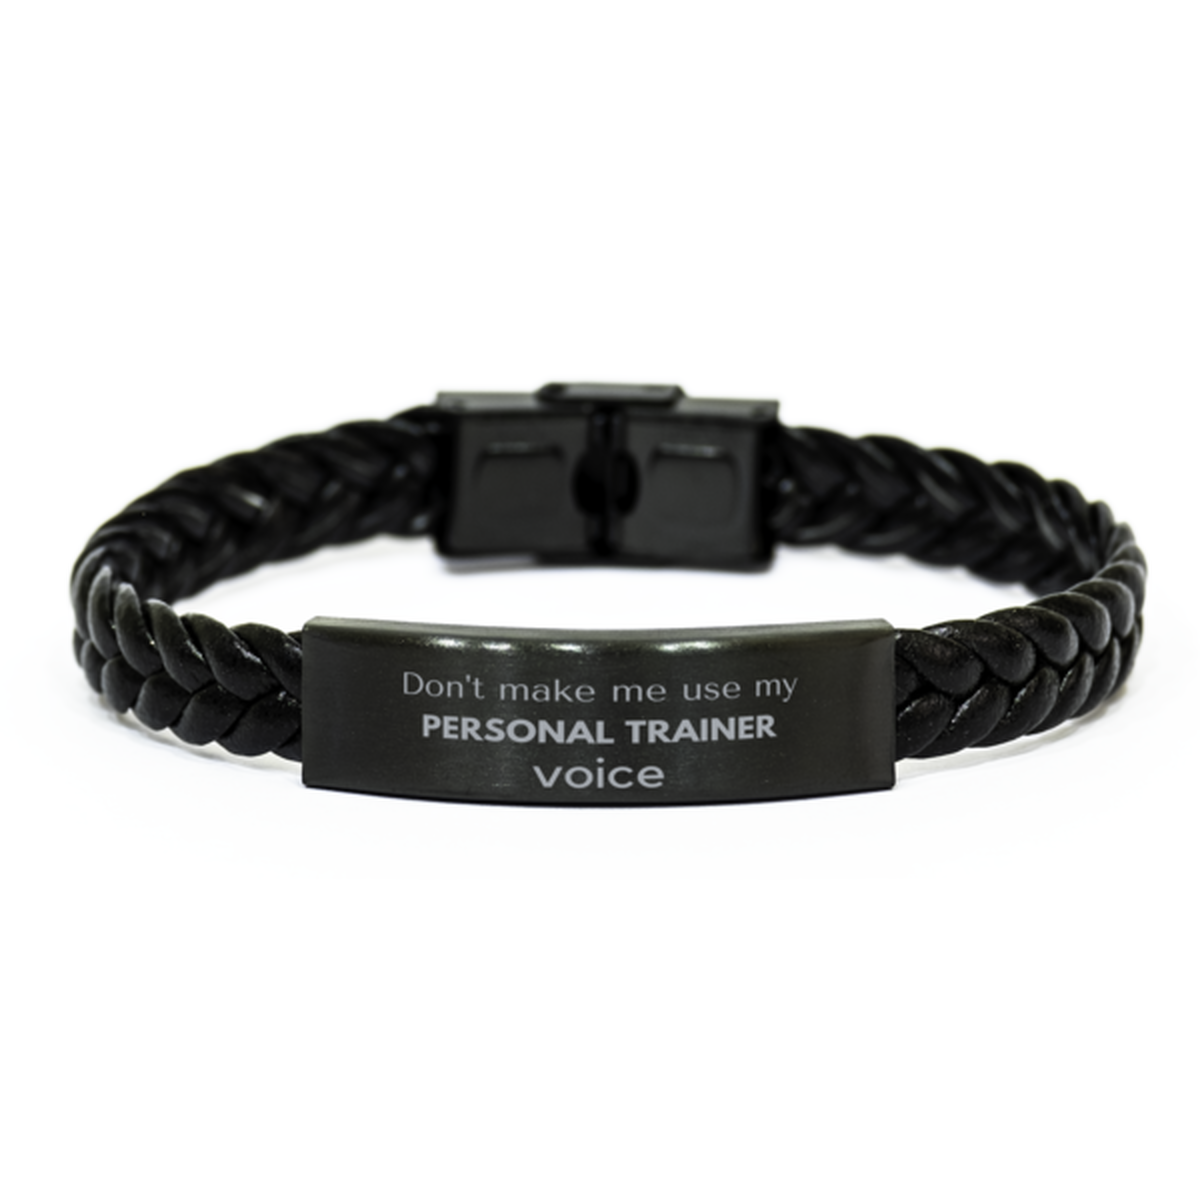 Don't make me use my Personal Trainer voice, Sarcasm Personal Trainer Gifts, Christmas Personal Trainer Braided Leather Bracelet Birthday Unique Gifts For Personal Trainer Coworkers, Men, Women, Colleague, Friends